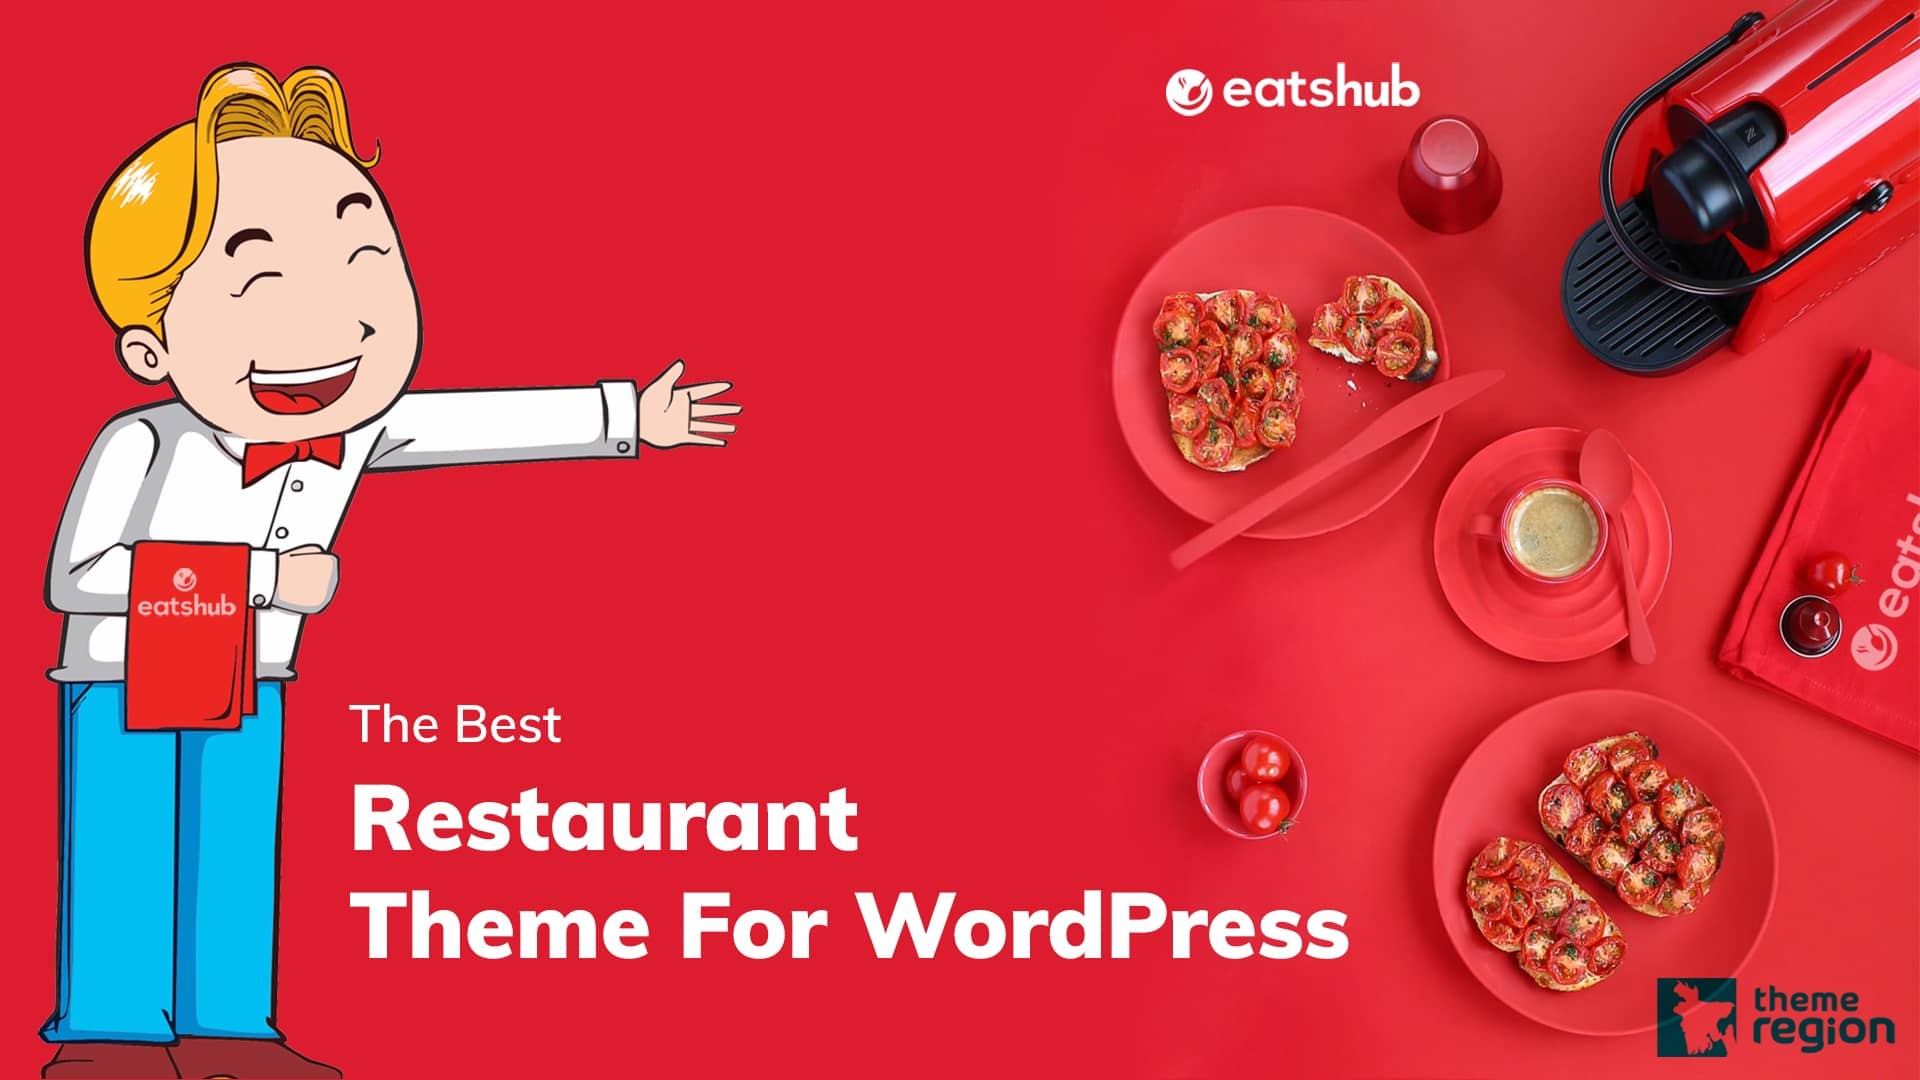 What Is The Best Restaurant Theme For WordPress? – Know The Real Answer